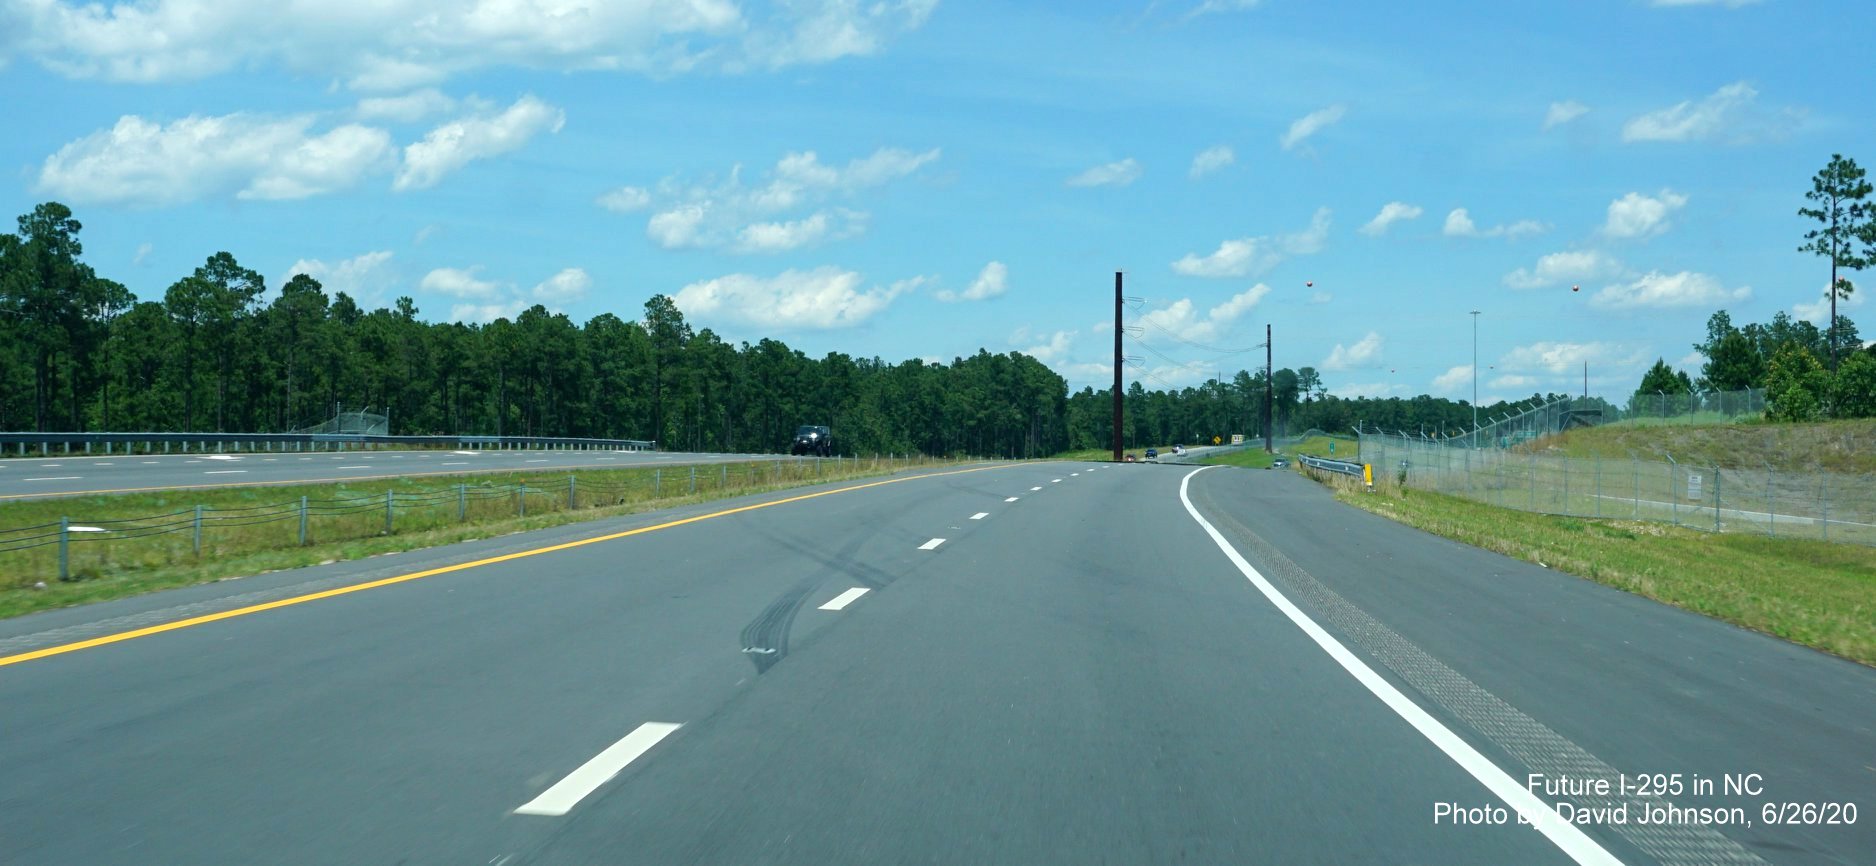 Image of NC 295 North roadway in vicinity of Canopy Lane exit in Fort Bragg, by David Johnson June 2020